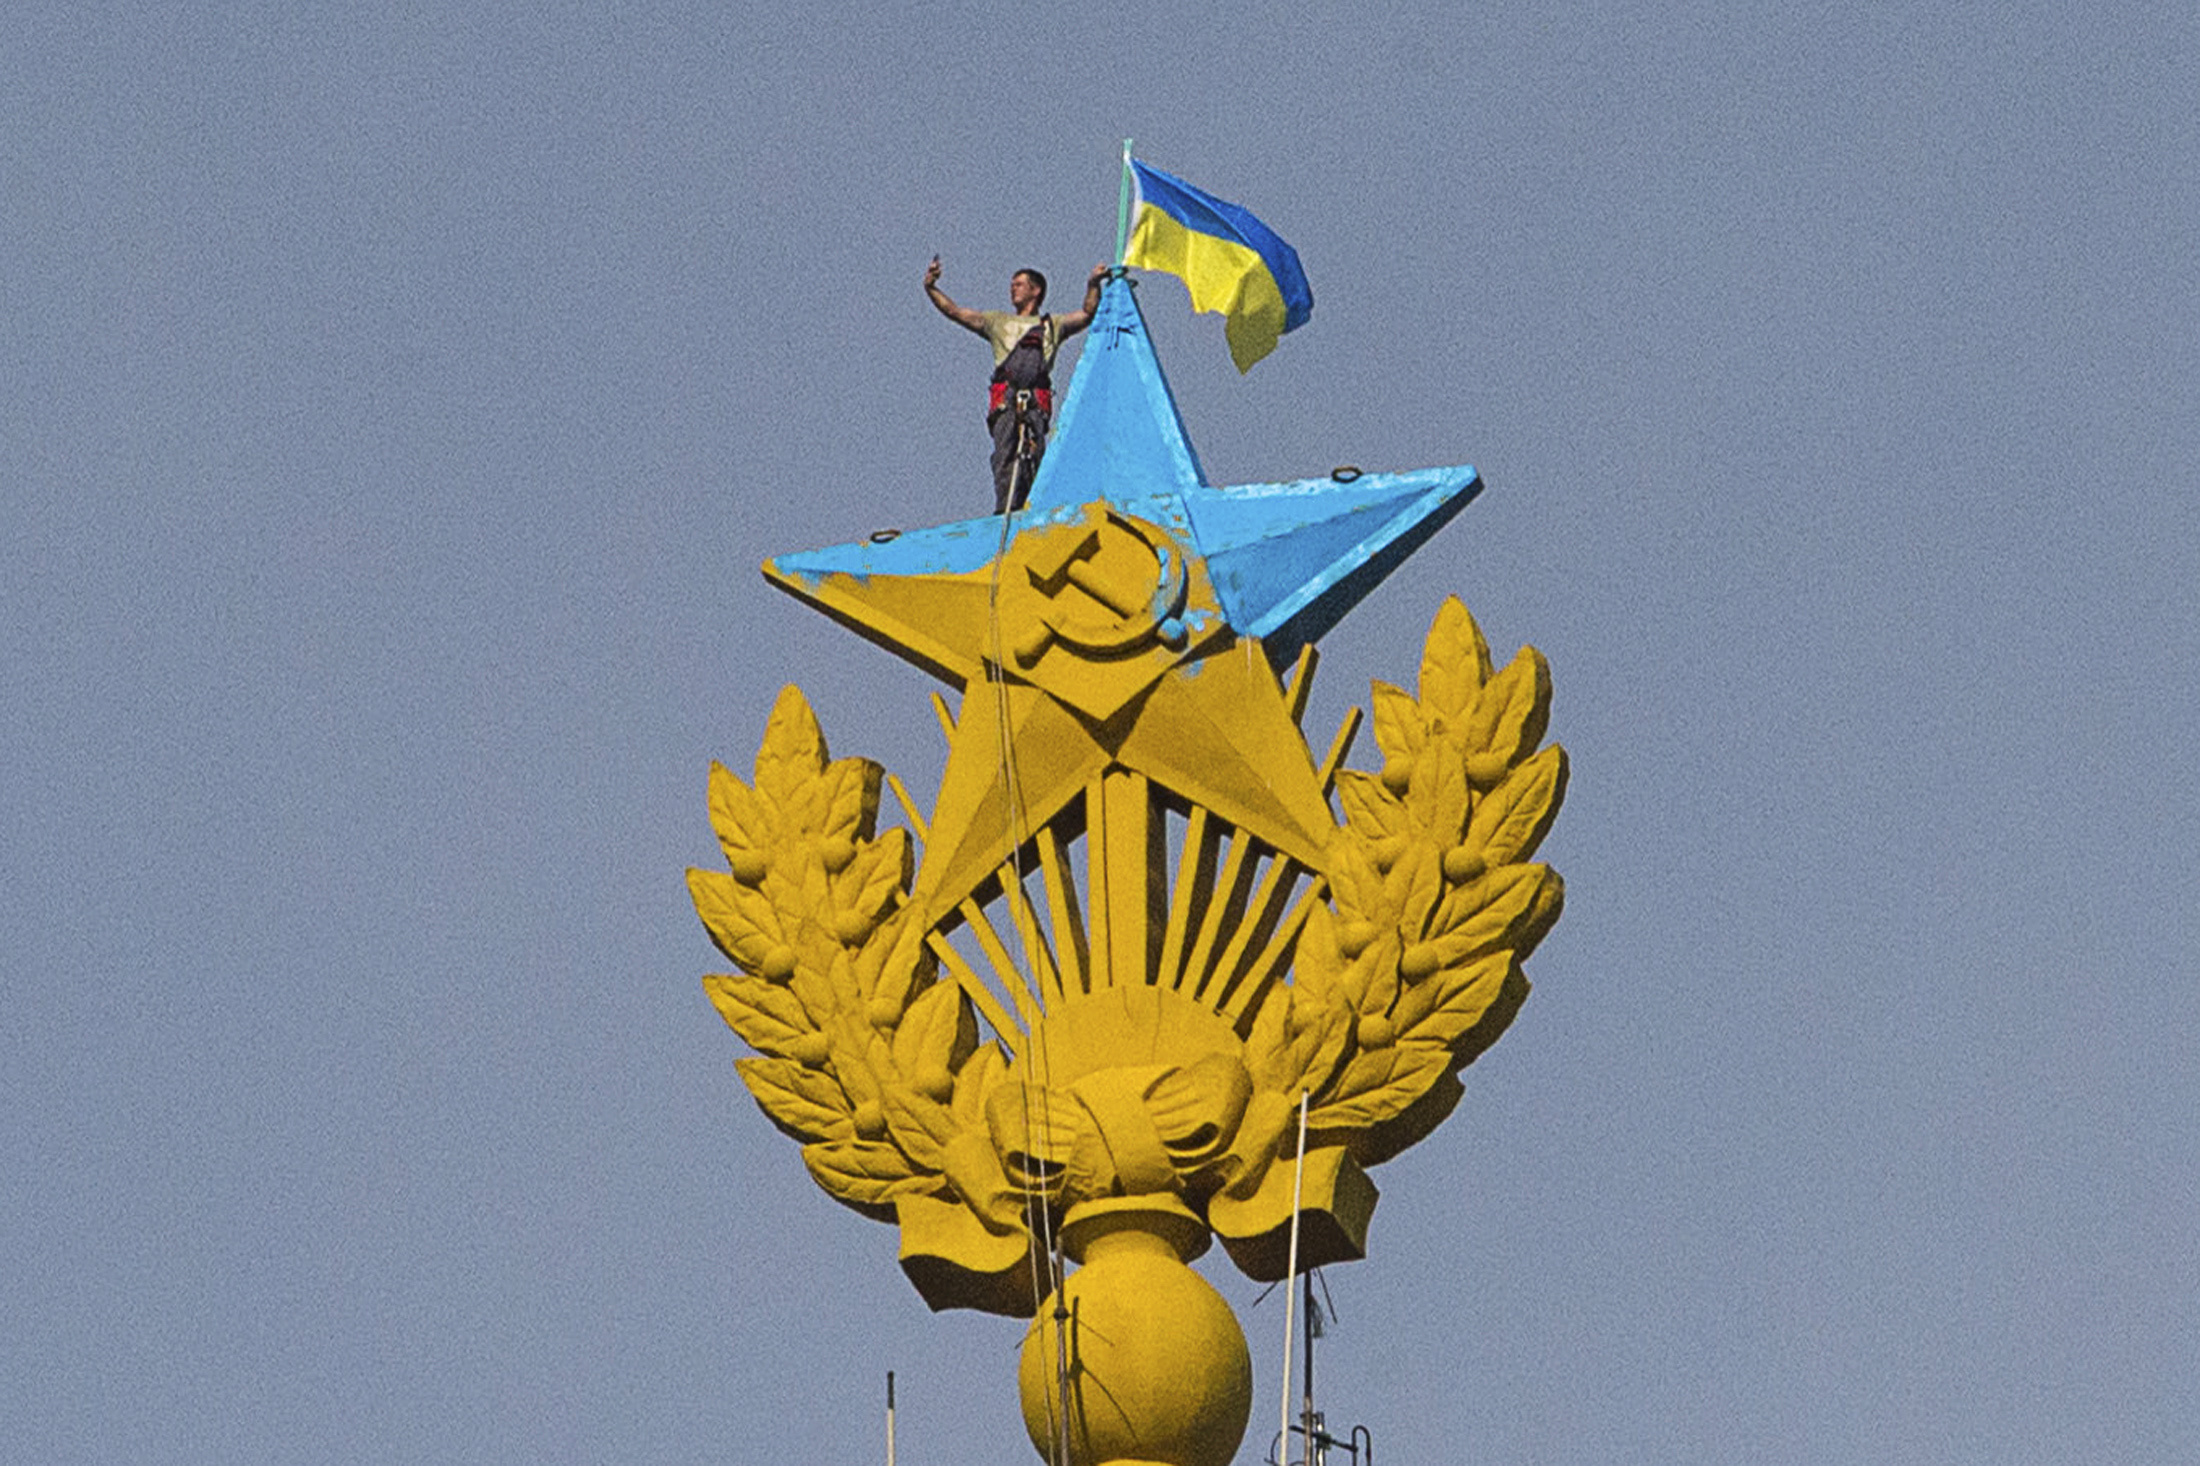 A man takes a 'selfie' as he stands with a Ukrainian flag on a Soviet-style star atop the spire of a building in Moscow. (© Stringer . / Reuters&mdash;REUTERS)